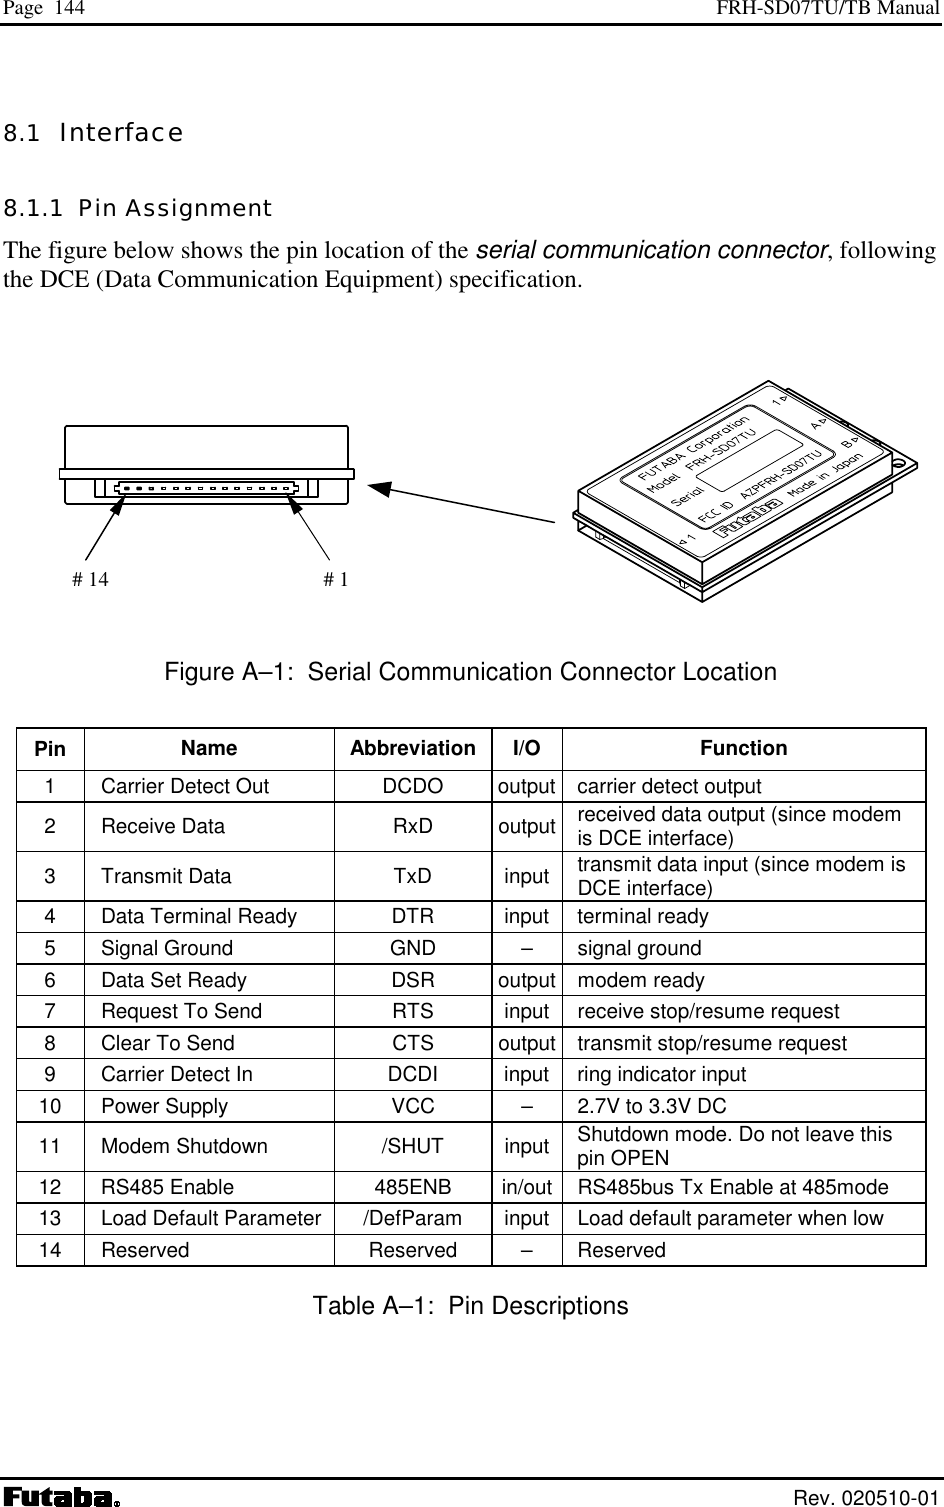 Page  144  FRH-SD07TU/TB Manual  Rev. 020510-01 8.1  Interface 8.1.1  Pin Assignment The figure below shows the pin location of the serial communication connector, following the DCE (Data Communication Equipment) specification.                                  Figure A–1:  Serial Communication Connector Location Pin  Name Abbreviation I/O  Function 1    Carrier Detect Out  DCDO  output    carrier detect output 2  Receive Data  RxD  output  received data output (since modem is DCE interface) 3  Transmit Data  TxD  input  transmit data input (since modem is DCE interface) 4    Data Terminal Ready  DTR  input    terminal ready 5    Signal Ground  GND  –    signal ground 6    Data Set Ready  DSR  output    modem ready 7    Request To Send  RTS  input    receive stop/resume request 8    Clear To Send  CTS  output   transmit stop/resume request 9    Carrier Detect In  DCDI  input    ring indicator input 10    Power Supply  VCC  –    2.7V to 3.3V DC 11  Modem Shutdown  /SHUT  input  Shutdown mode. Do not leave this pin OPEN 12    RS485 Enable  485ENB  in/out    RS485bus Tx Enable at 485mode 13    Load Default Parameter  /DefParam  input    Load default parameter when low 14  Reserved  Reserved  –   Reserved Table A–1:  Pin Descriptions  # 1 # 14 